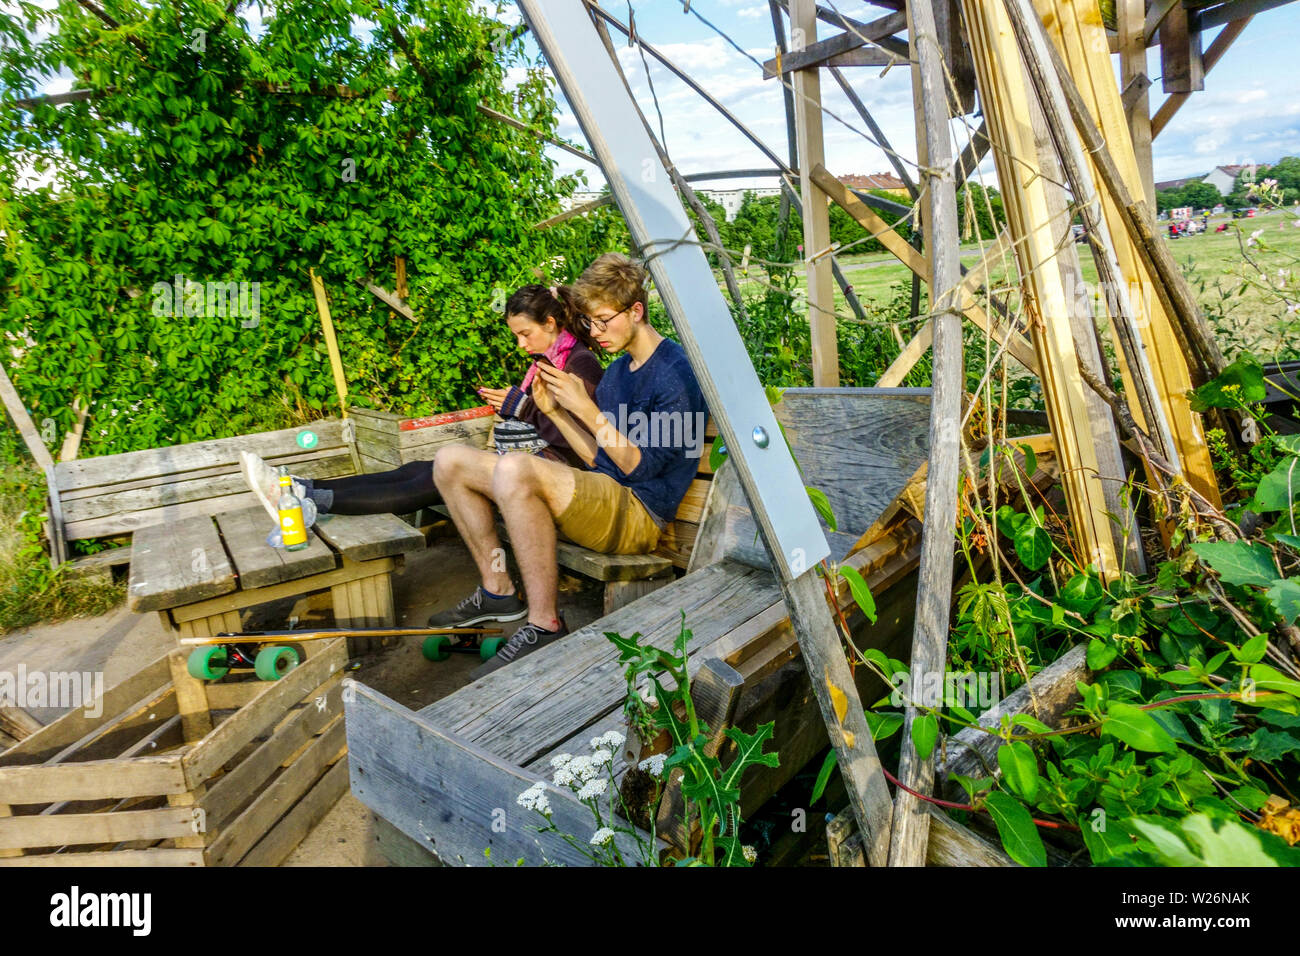 A young couple, people enjoy leisure in the community garden on Tempelhof field, Berlin-Neukölln, Germany daily life Europe Stock Photo